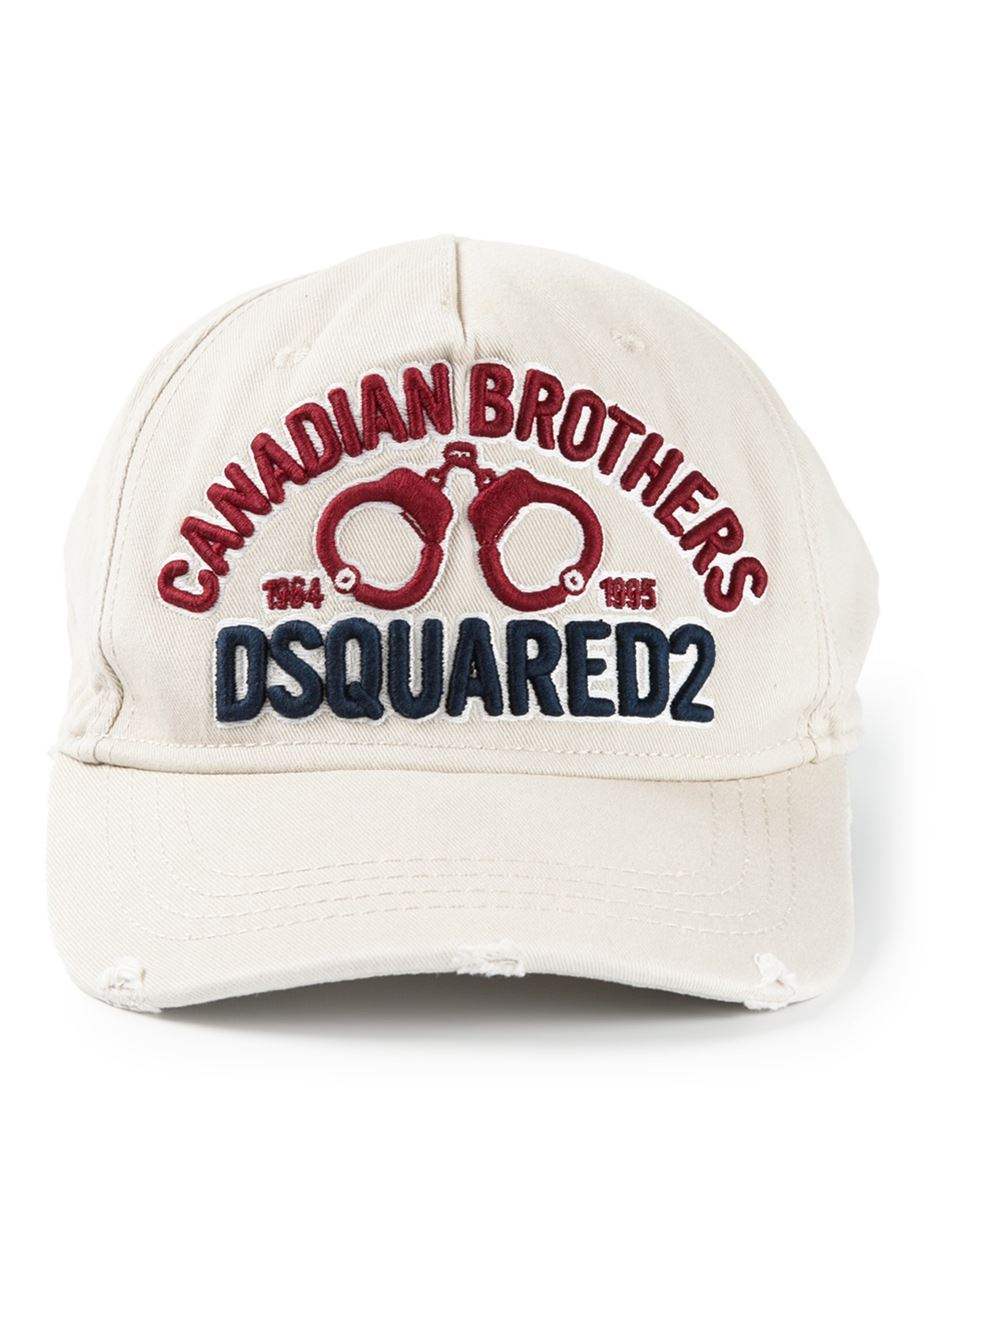 canadian brothers cap